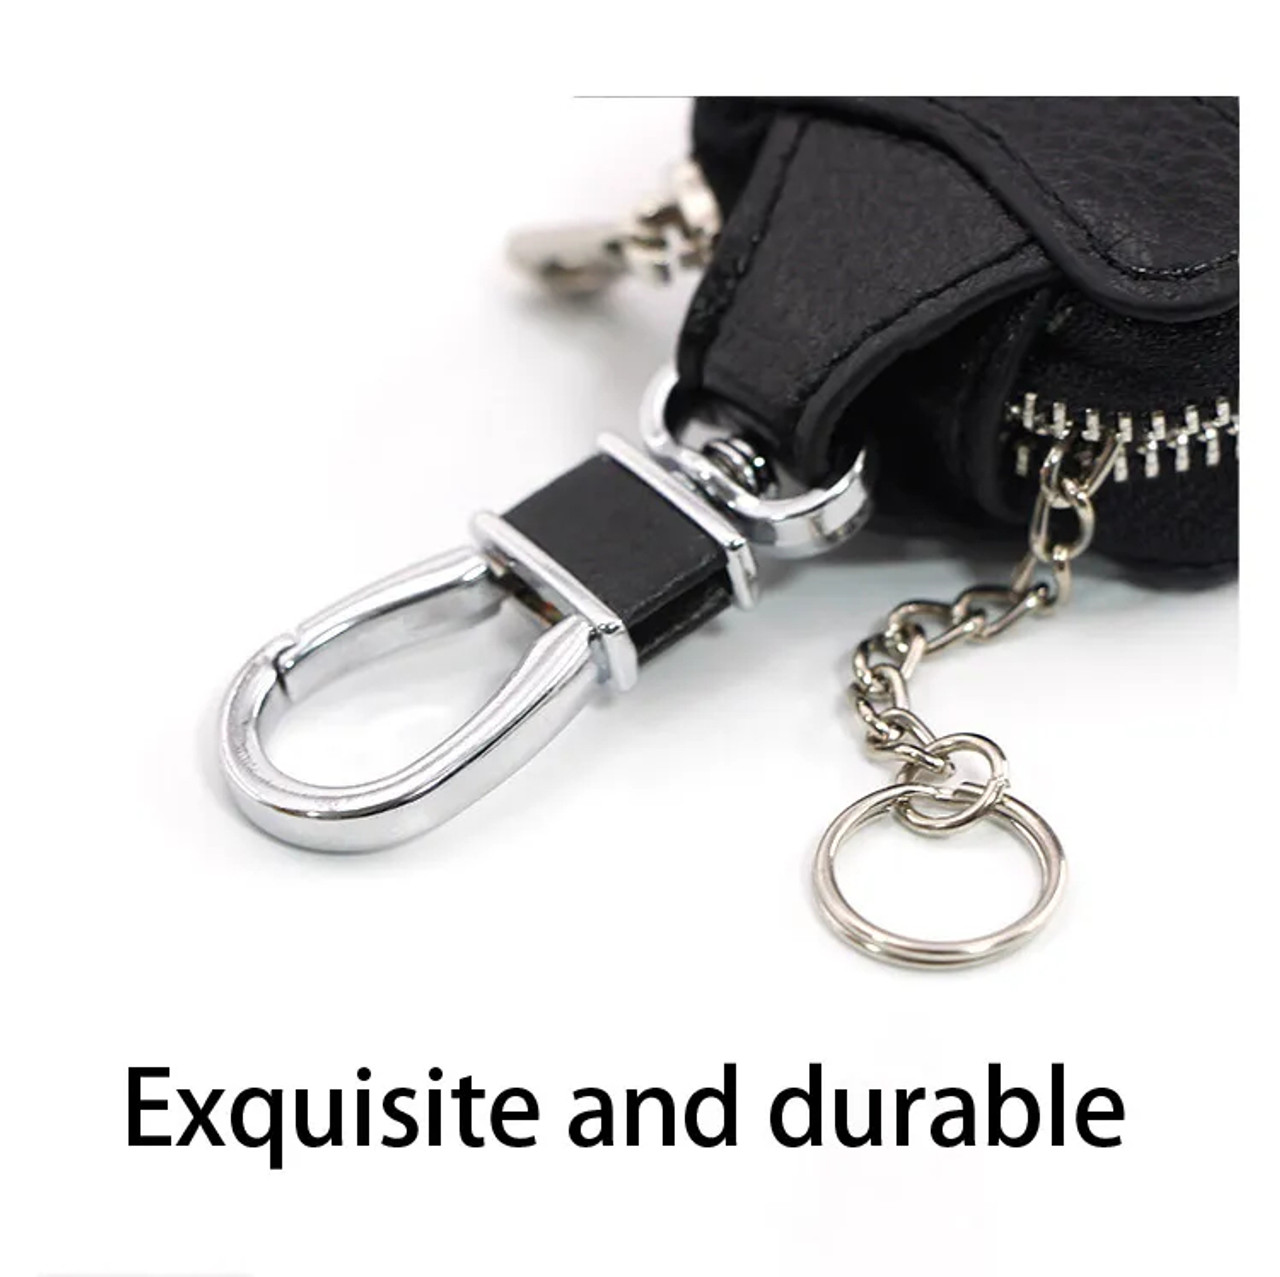 Keychain Clip and Key Ring. Purse Accessory Zipper Pull. Faux Leather  Silver or Gold Finish. 